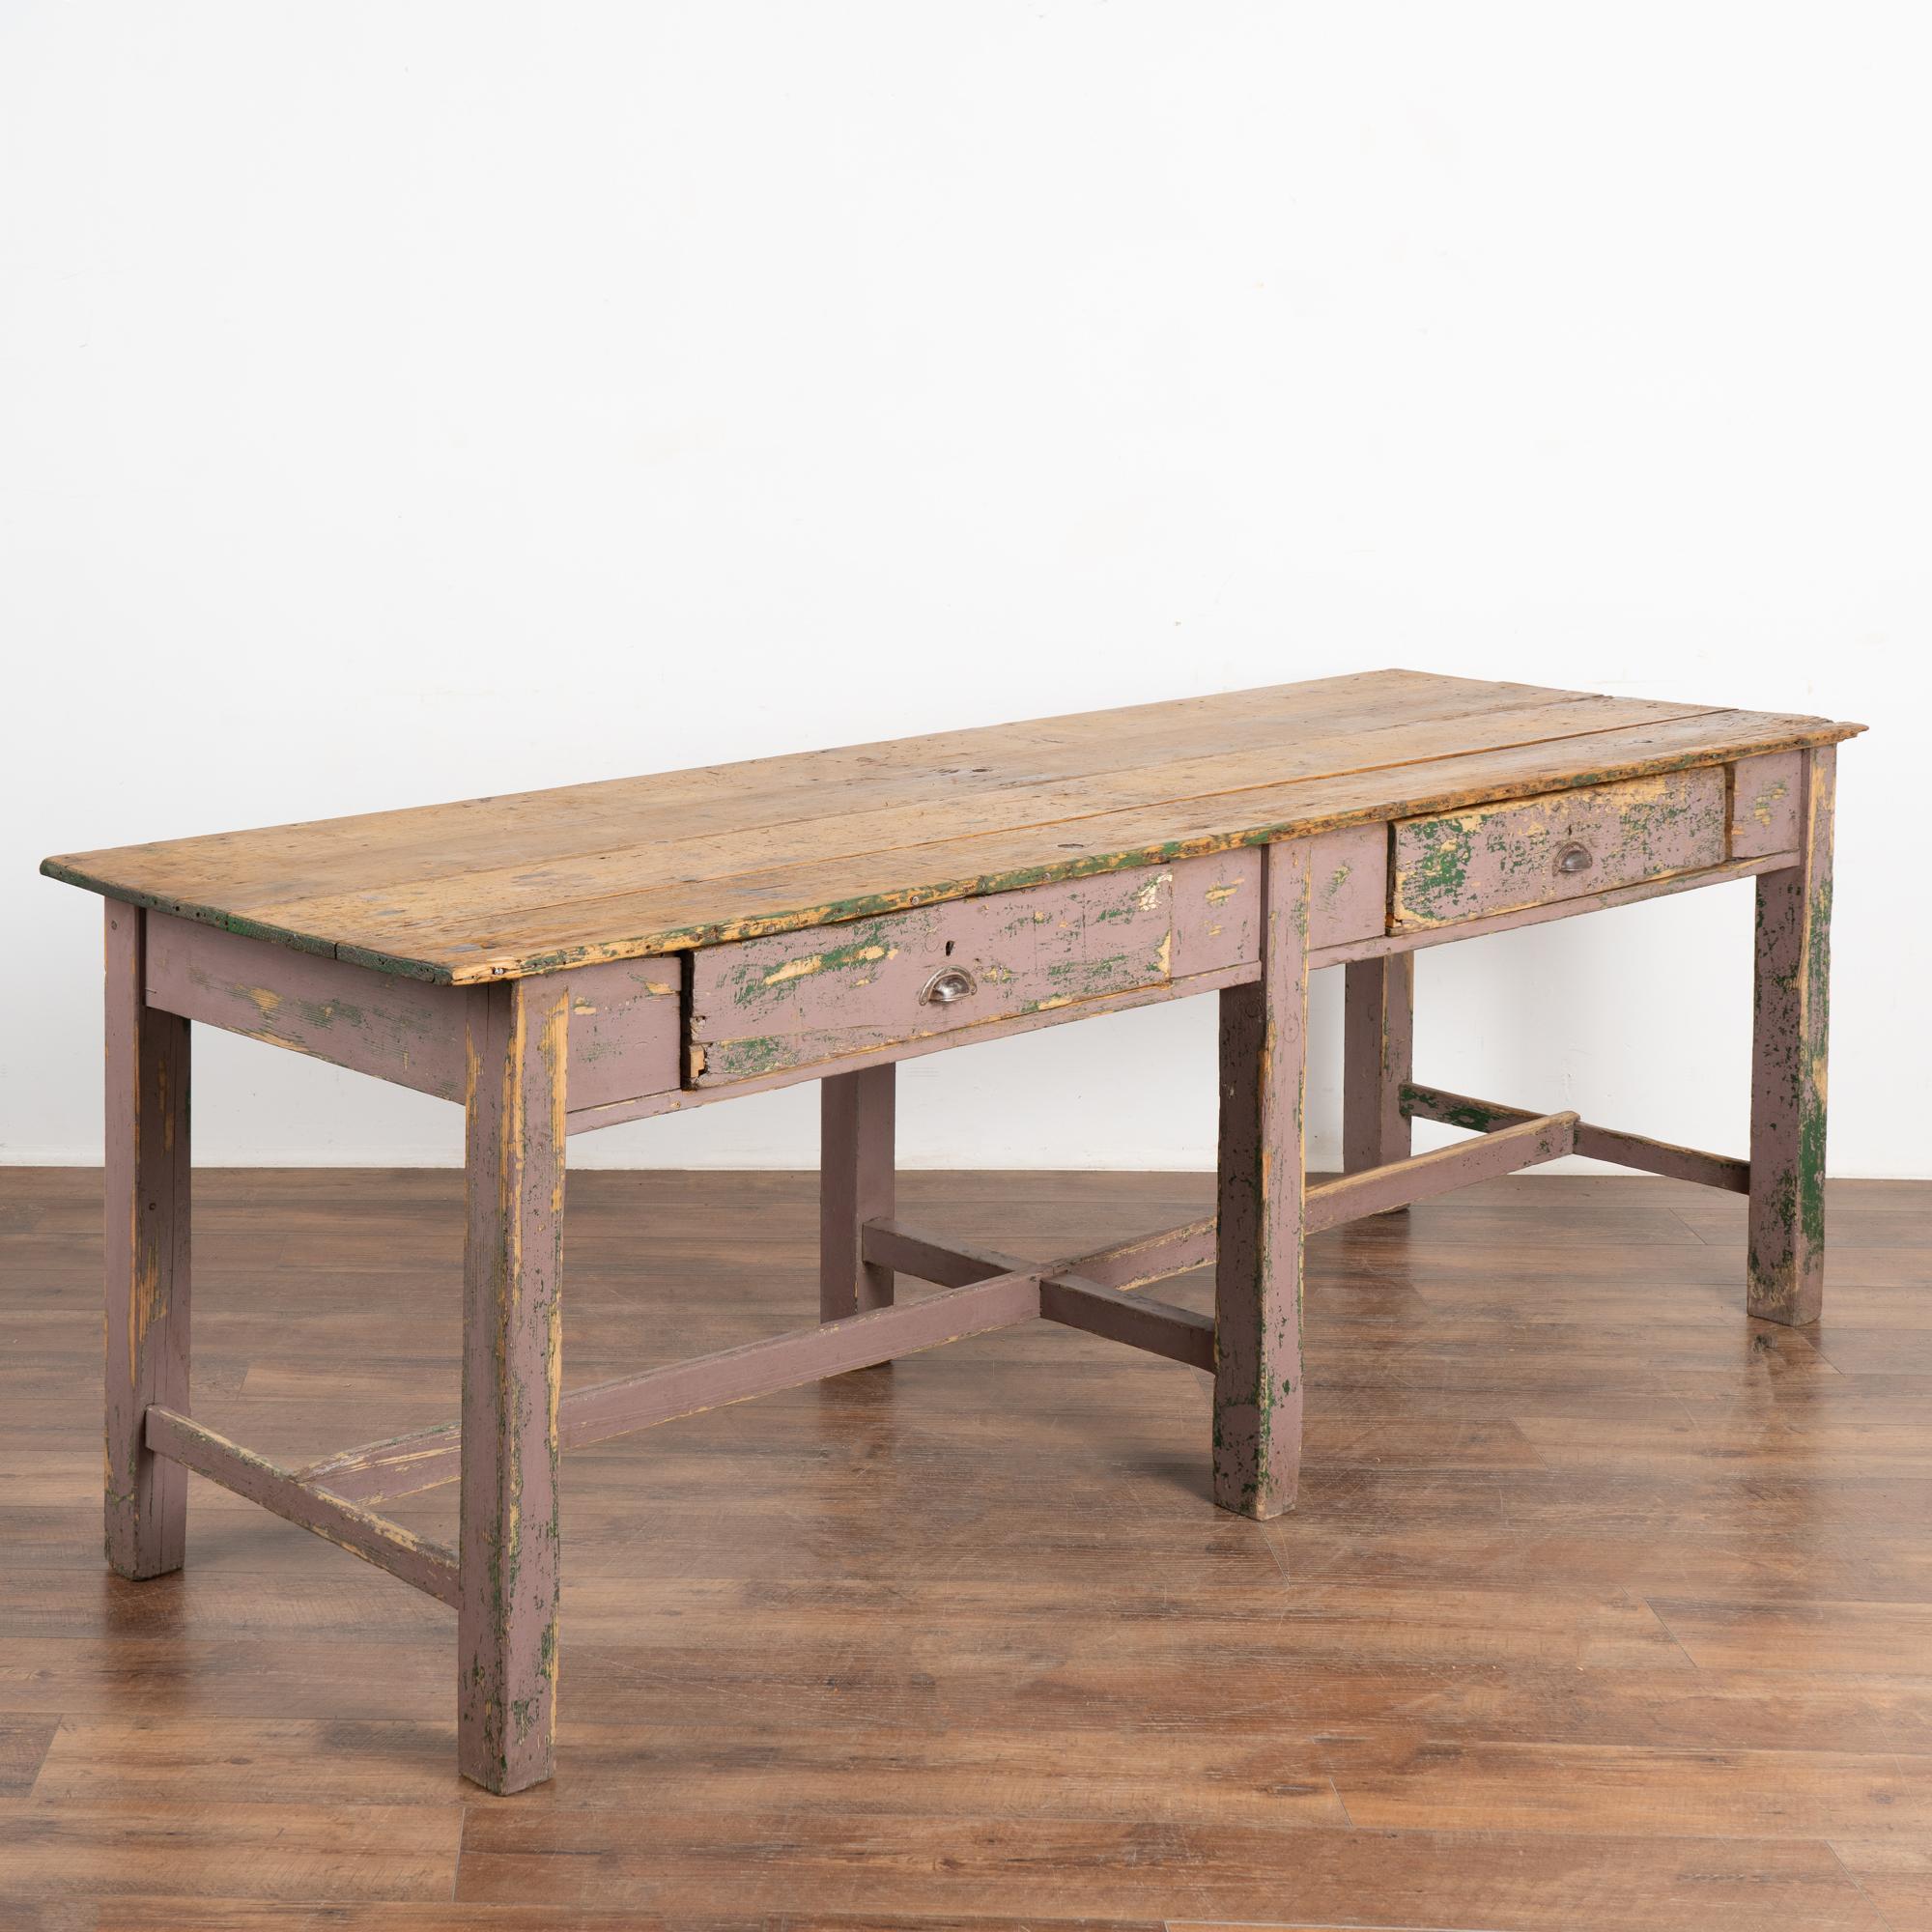 Rustic work table with two drawers and lower stretcher base with six legs. Original purple and green painted finish show extensive distress and wear down to the natural pine below. 
This heavily used table reflects generations of use in every gouge,